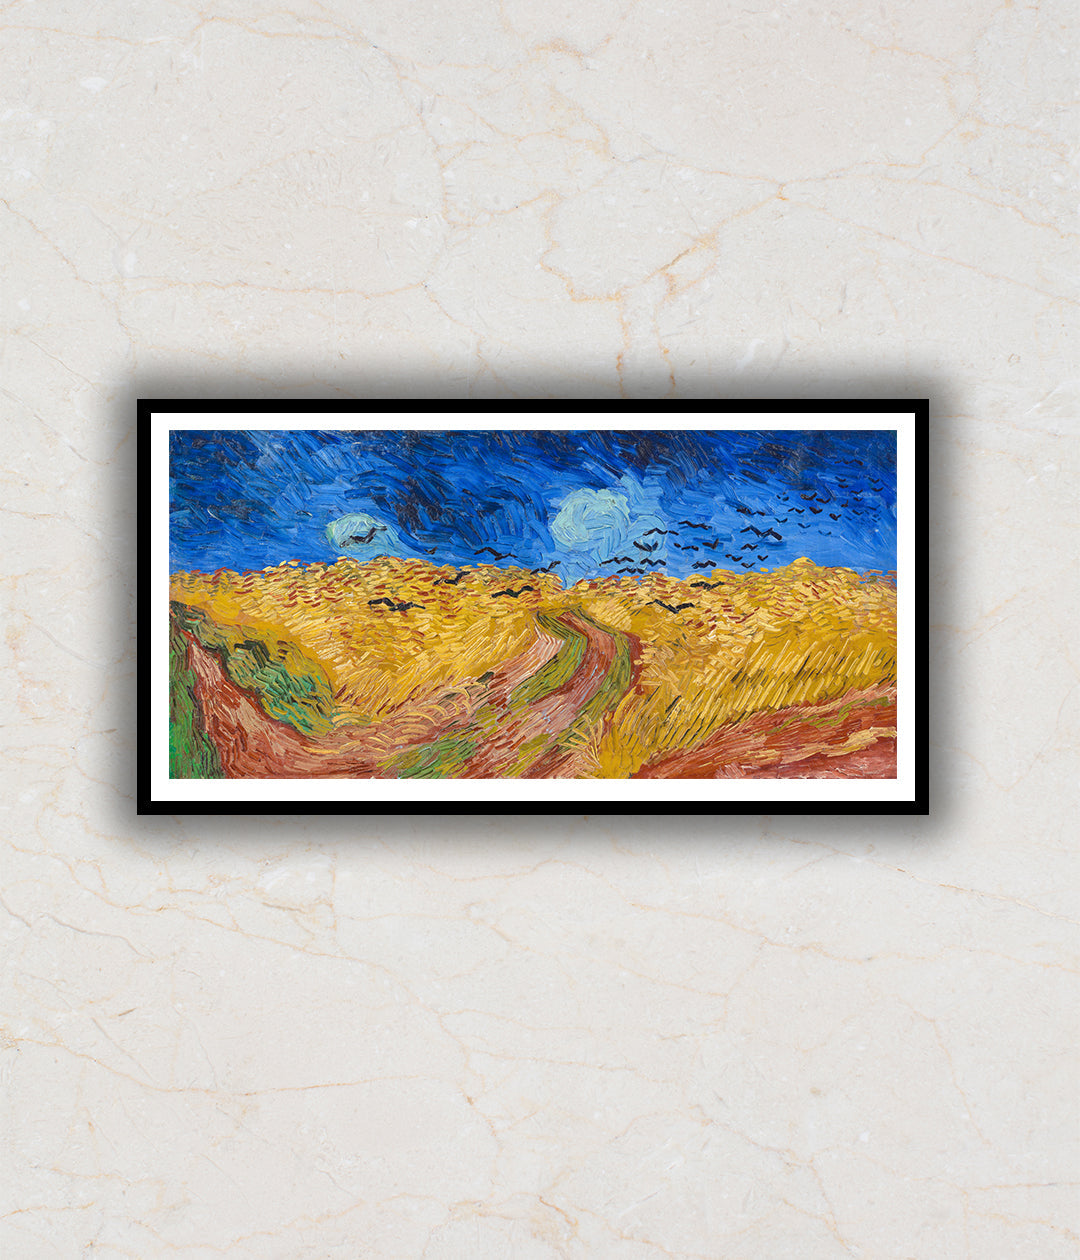 Wheatfield with Crows (1890) Artwork Painting For Home Wall Art D�_cor By Vincent Van Gogh